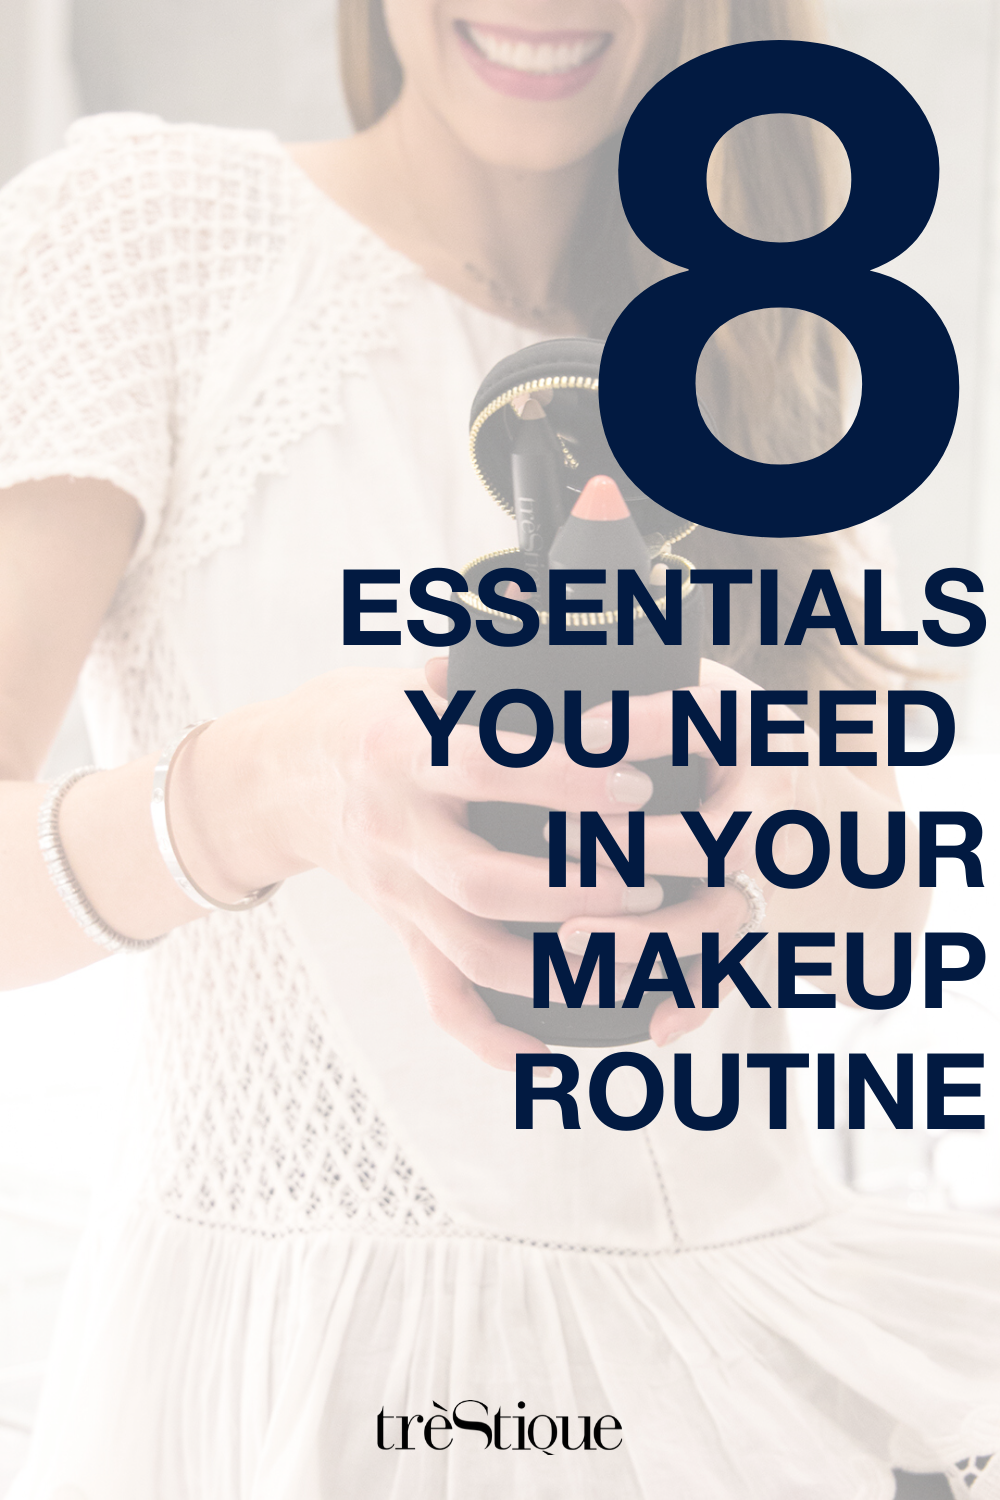 18 beauty Routines makeup ideas